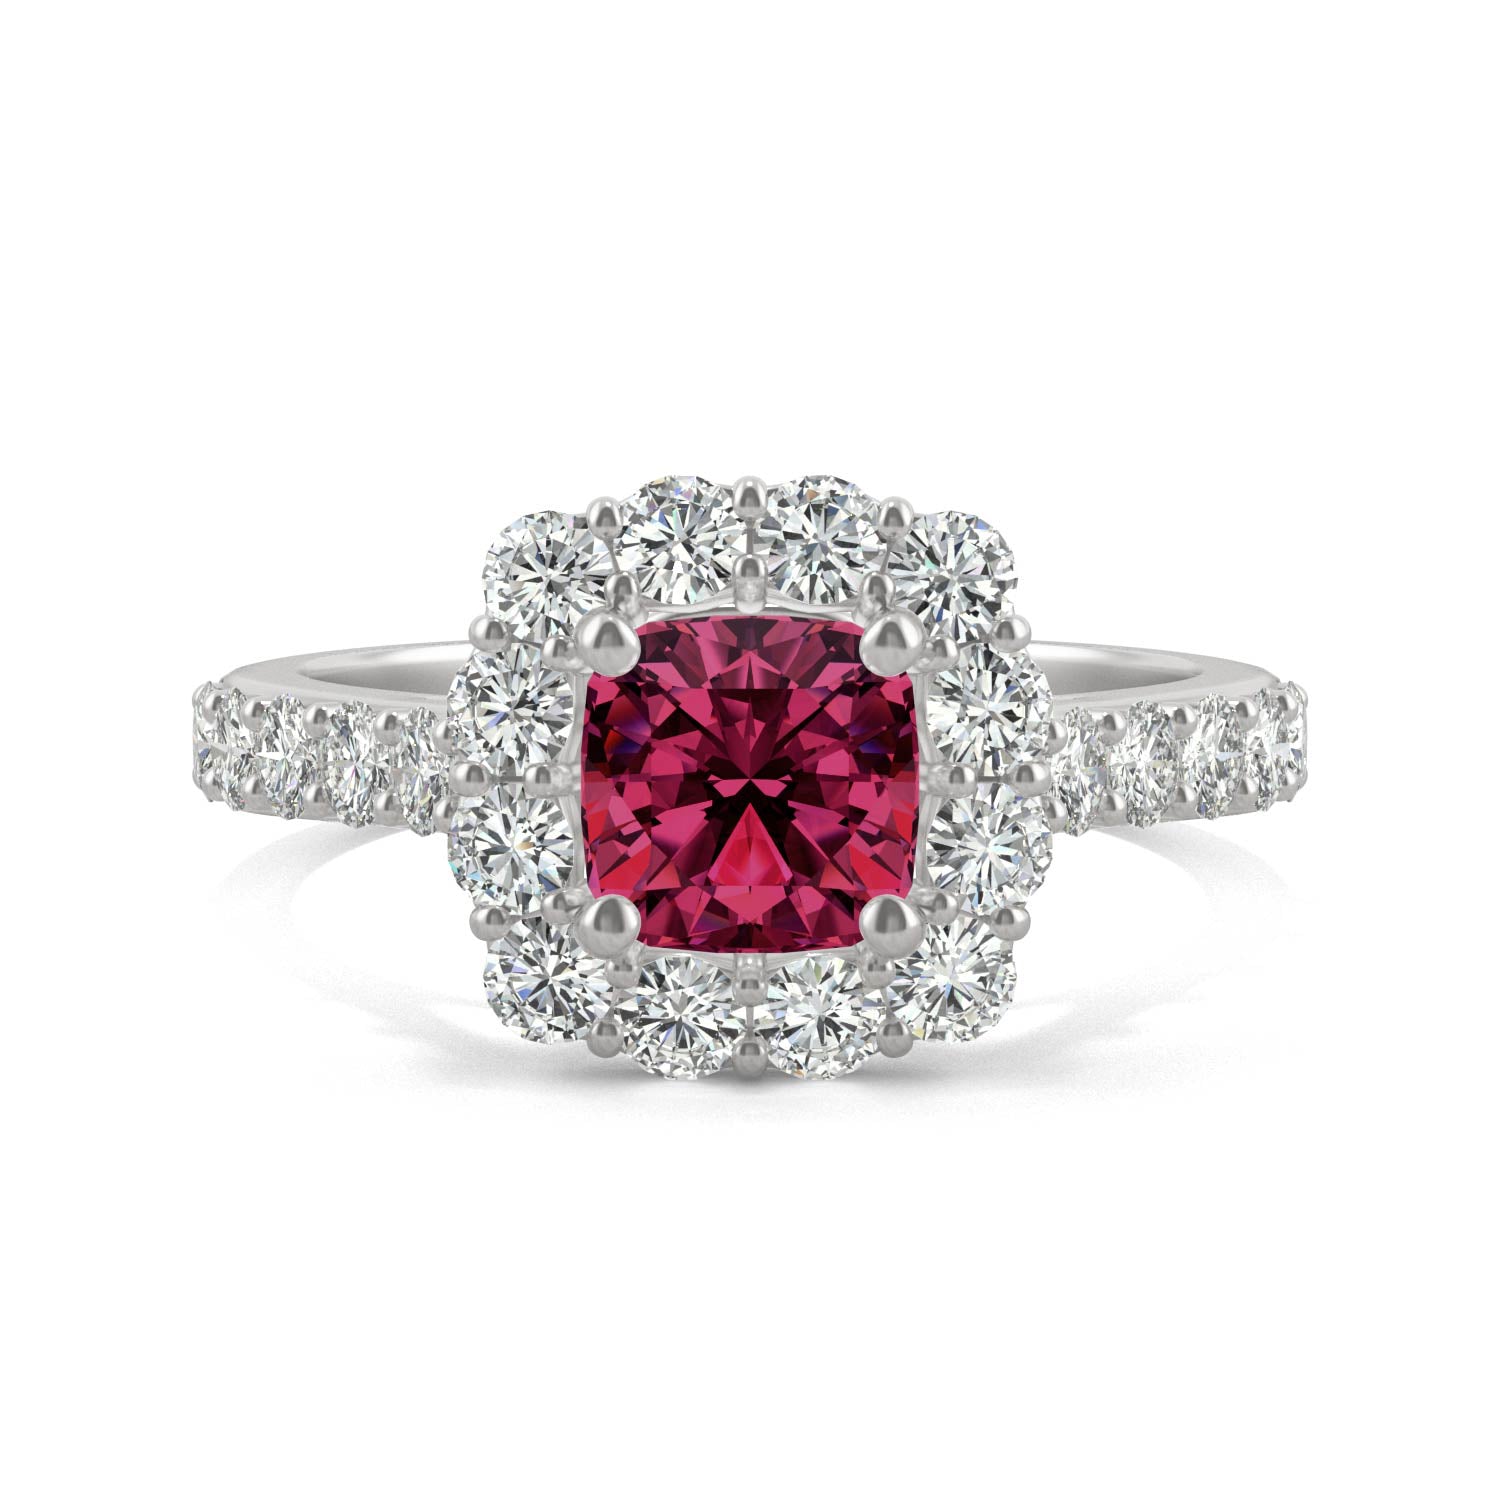 2.30 CTW DEW Cushion Ruby Halo Ring in 14K White Gold